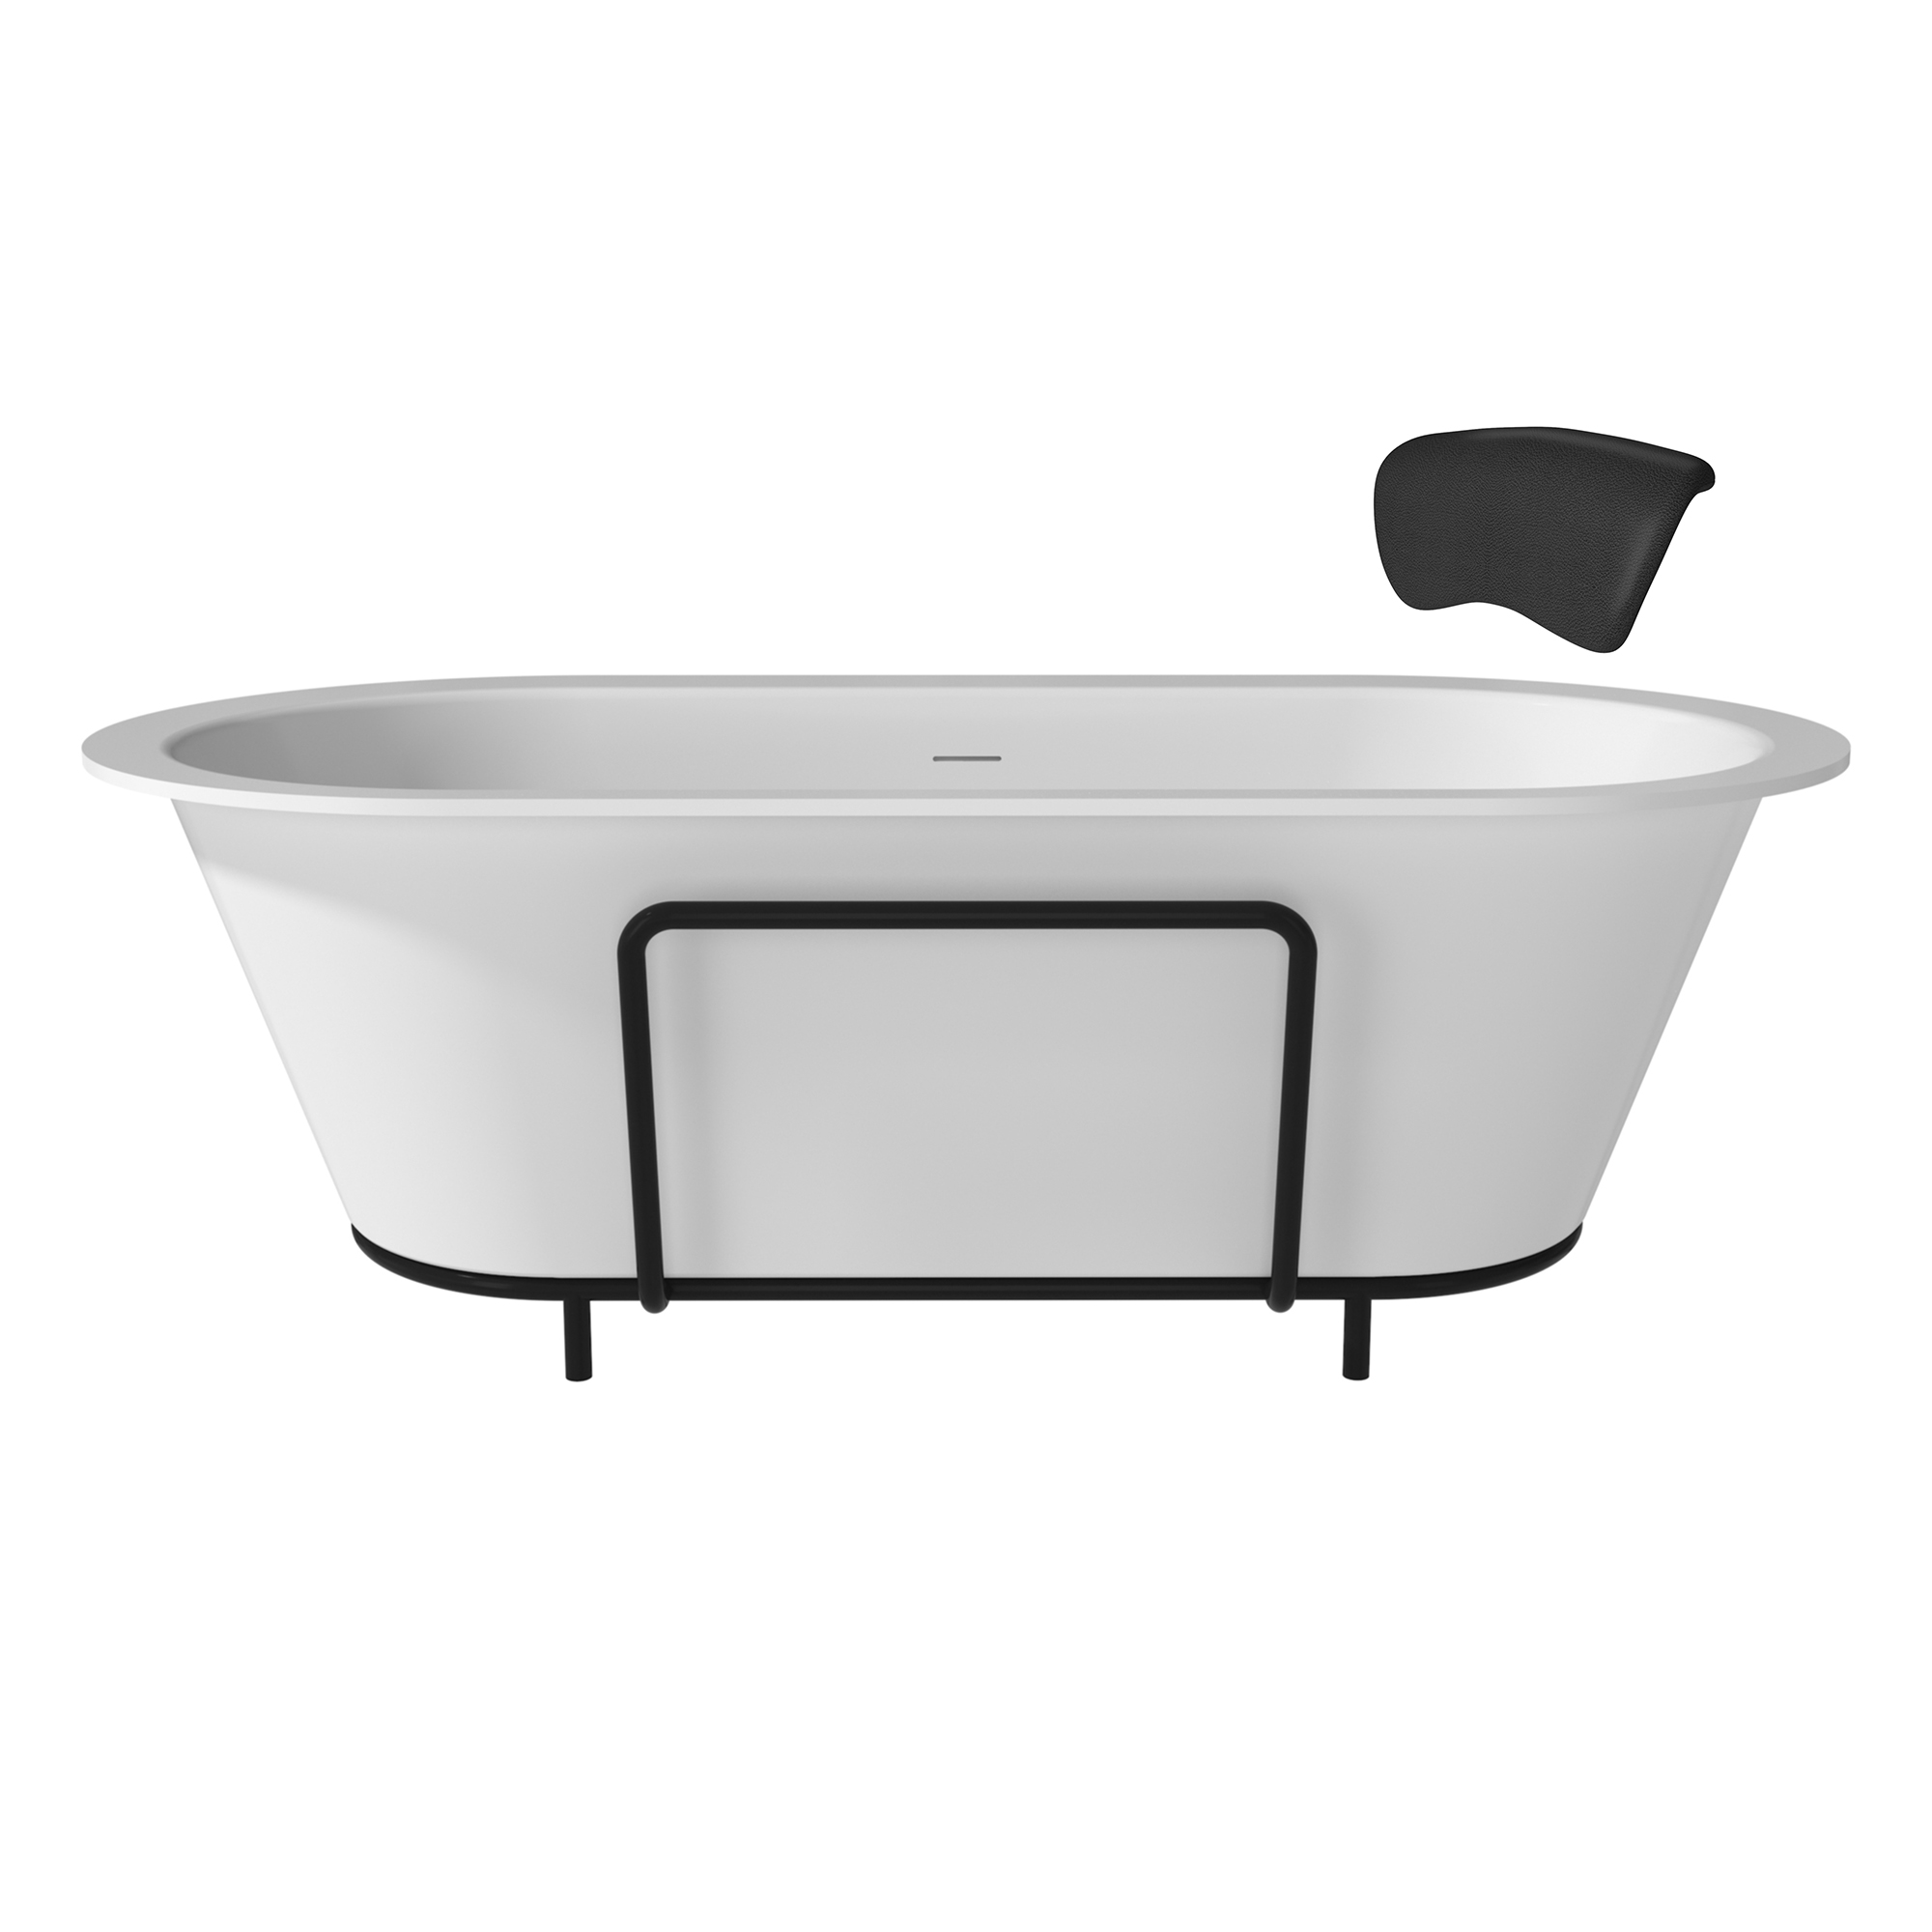 67/71" Stone Resin Adult Freestanding Soaking Tub with Cushions, Rectangular Shaped Solid Surface Bathtubs, Matte White 